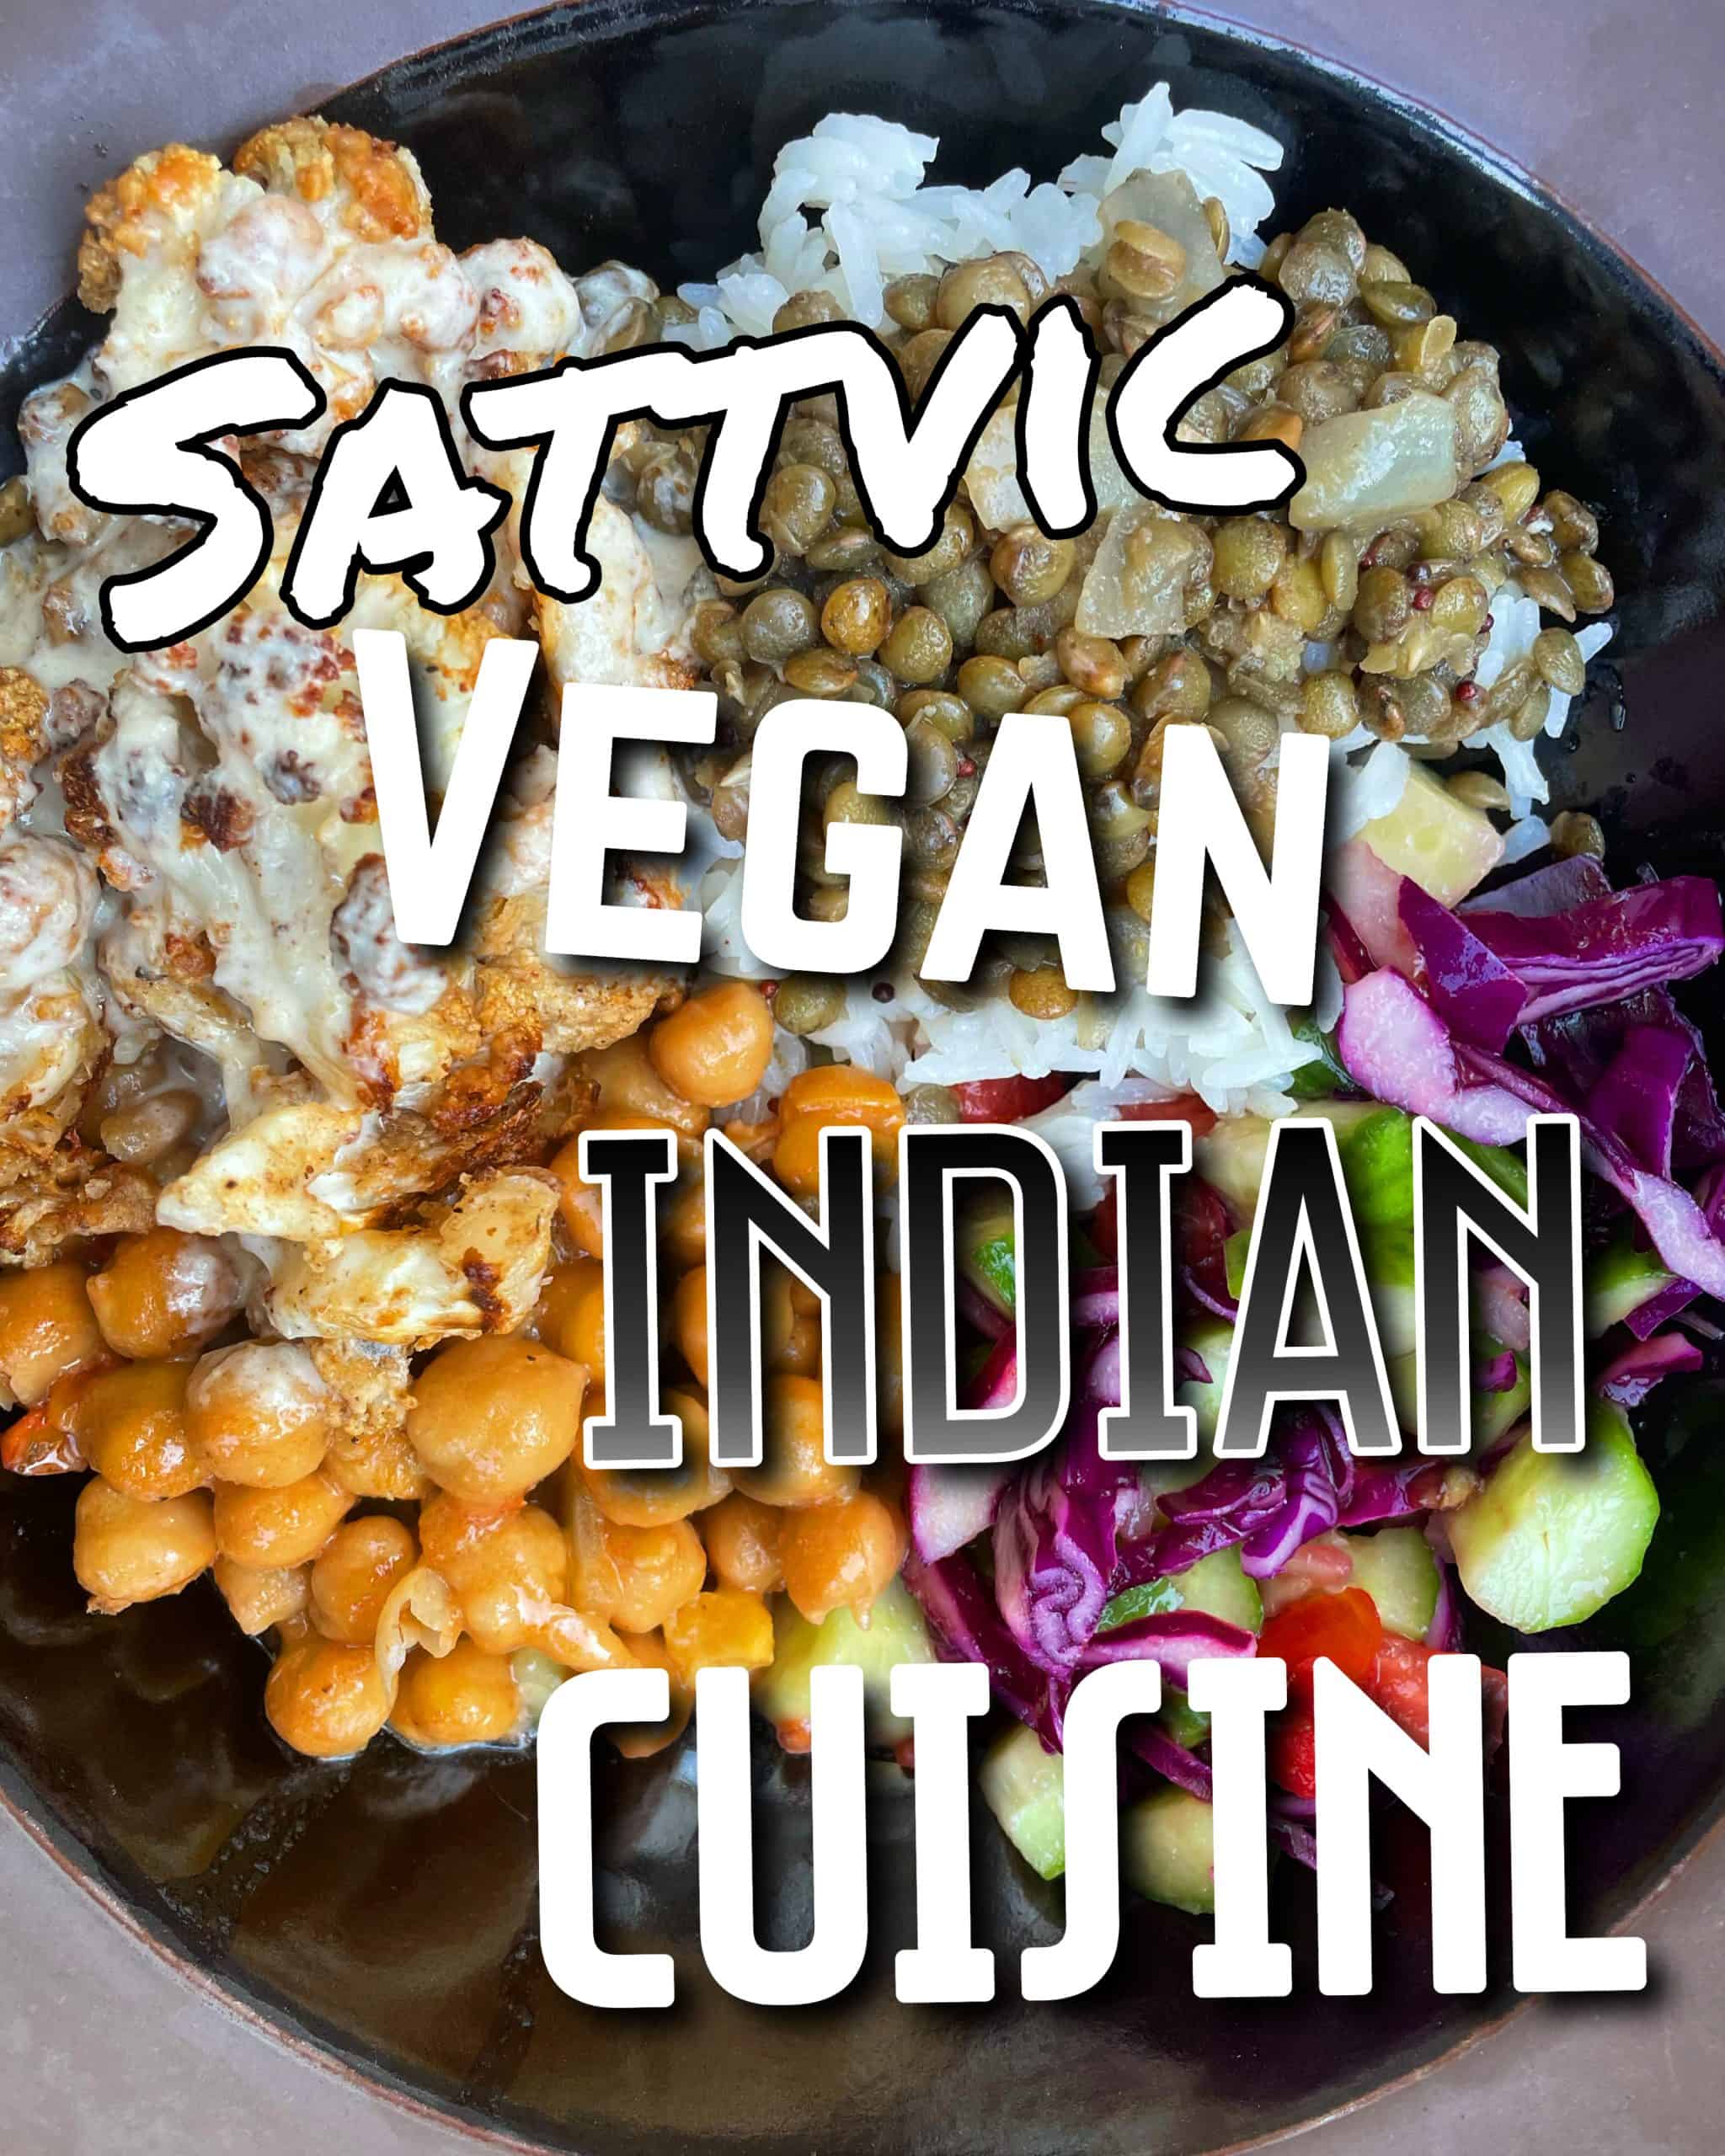 A bowl of indian food with the text "Sattvic vegan Indian cuisine" overlaid on it.